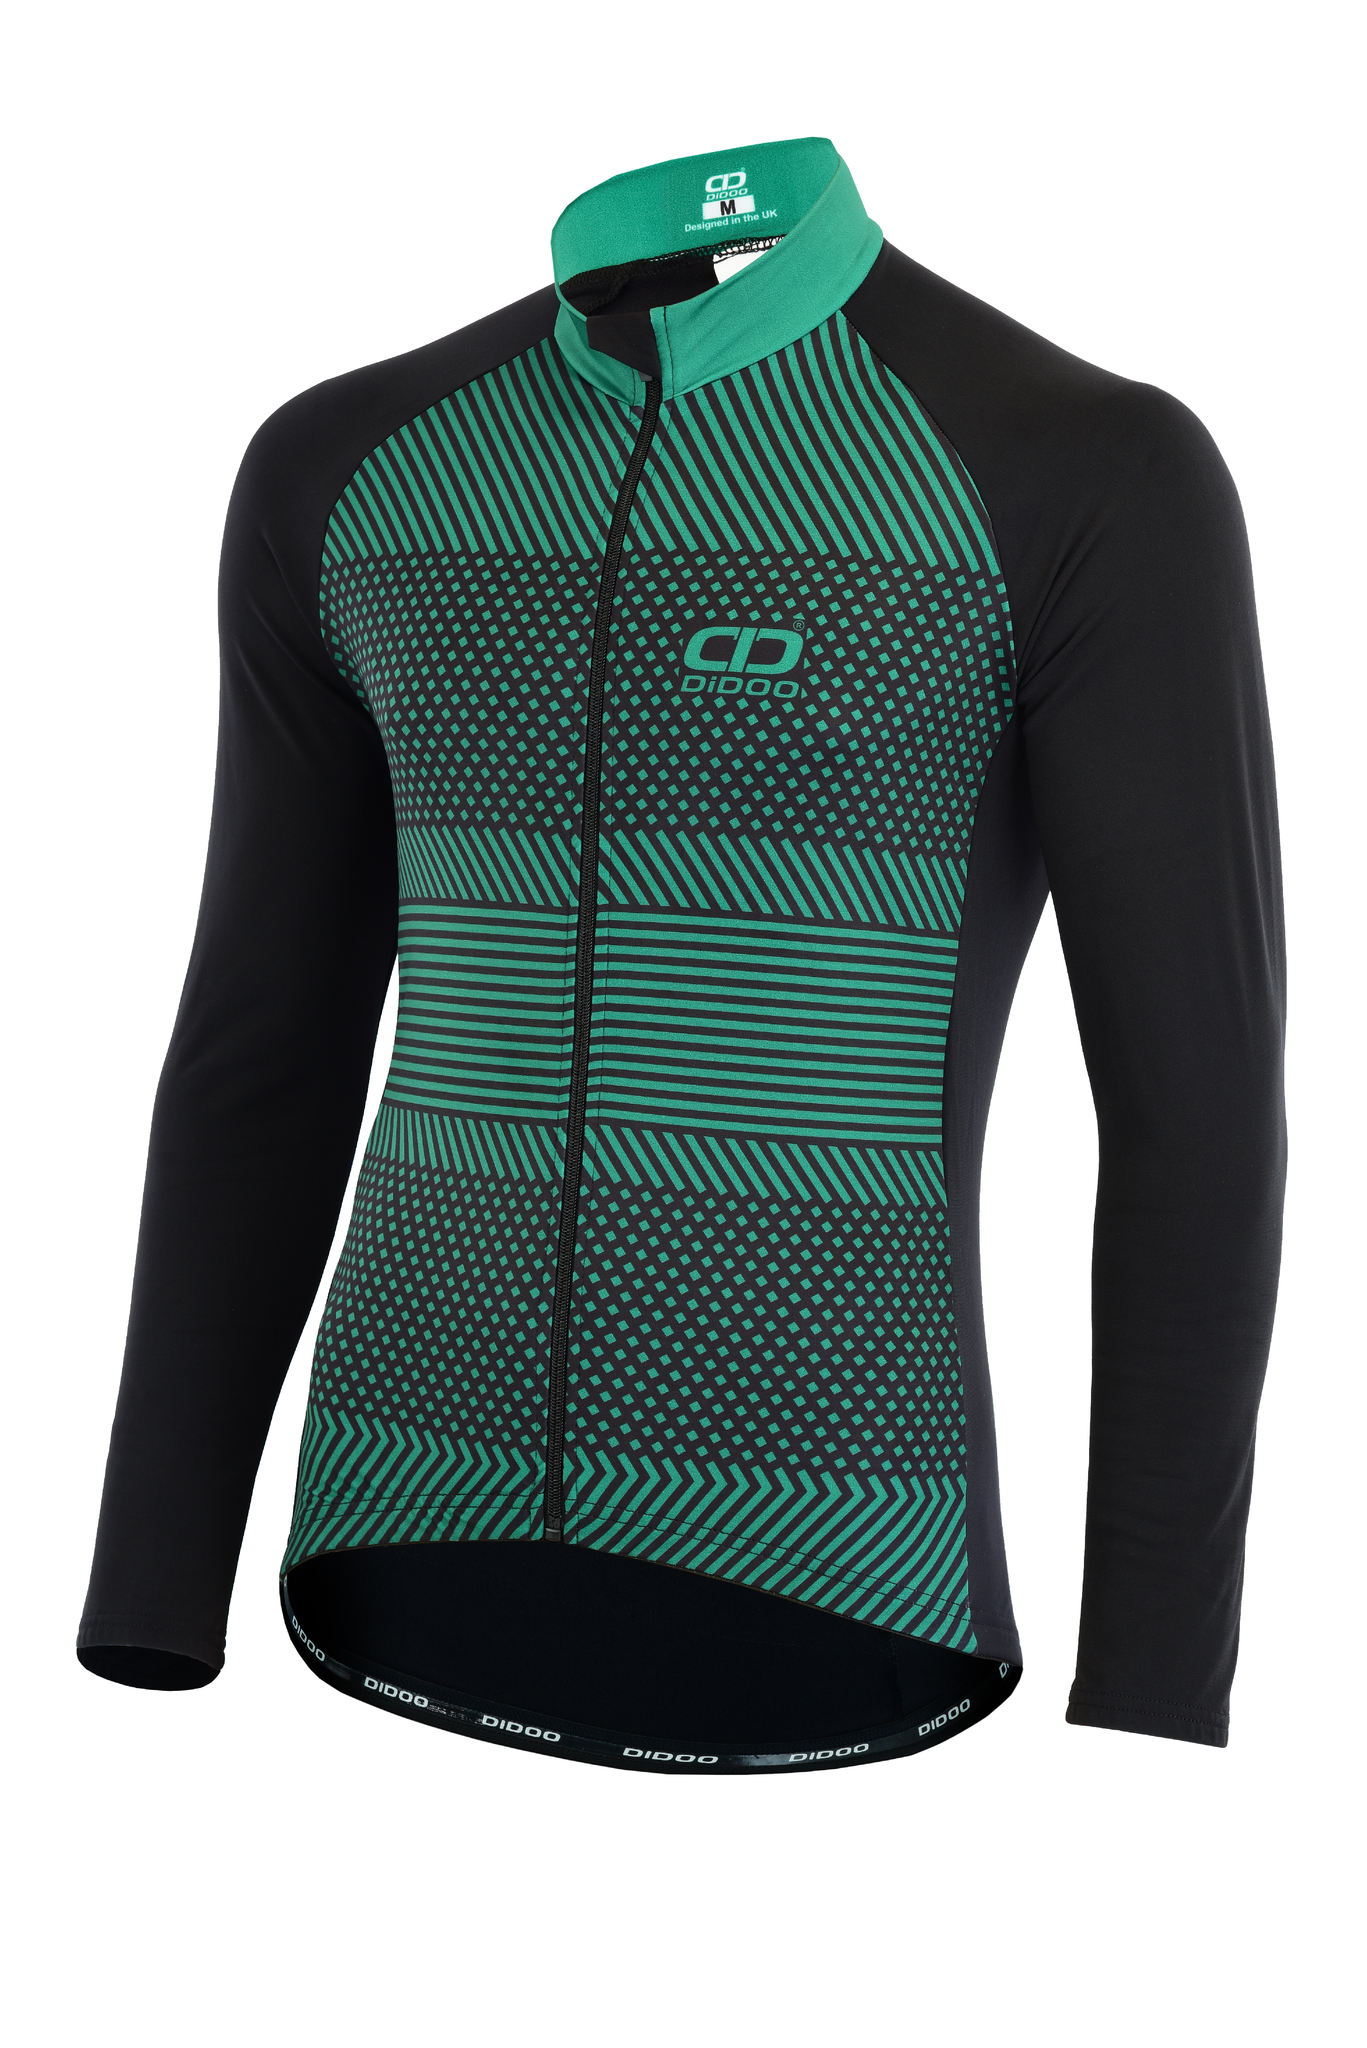 DiDOO Men’s Pro long sleeve winter cycling jersey Black and Green